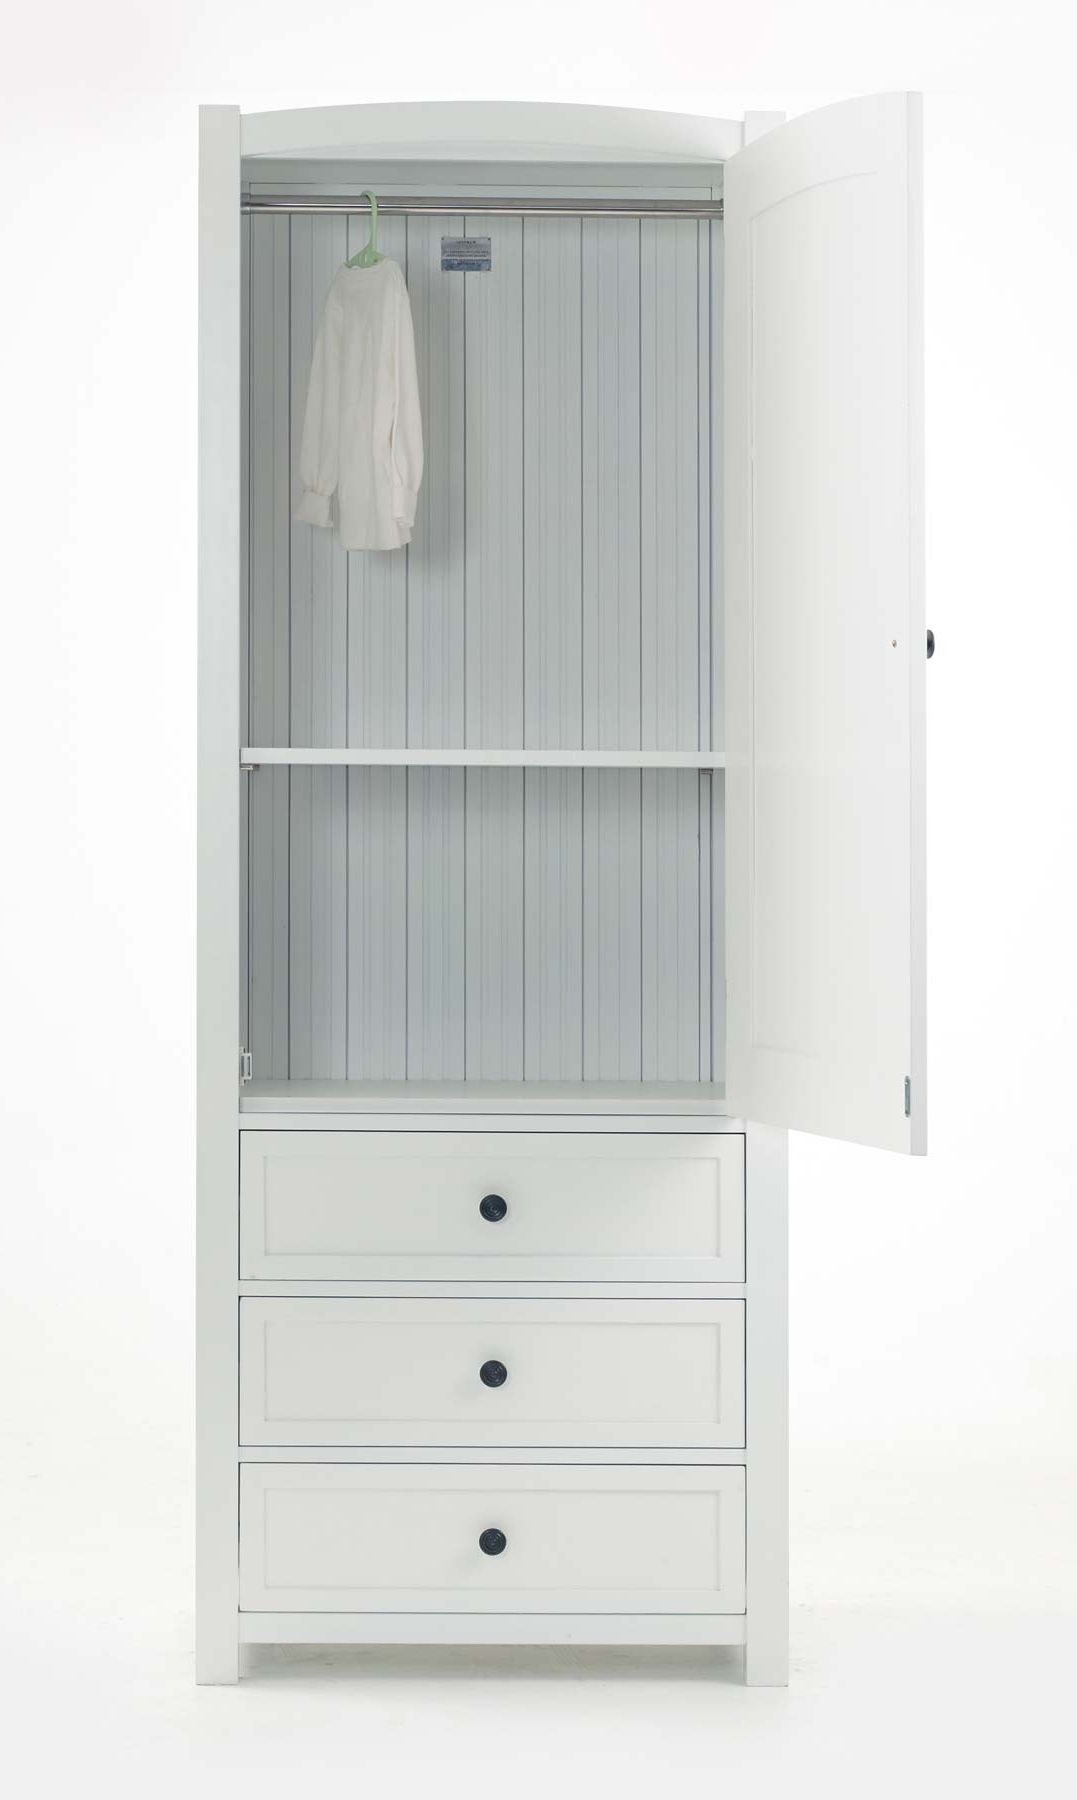 Vintage White Wooden Wardrobe With Inside Shelves And Numerous With Regard To Current White Wood Wardrobes With Drawers (View 10 of 15)